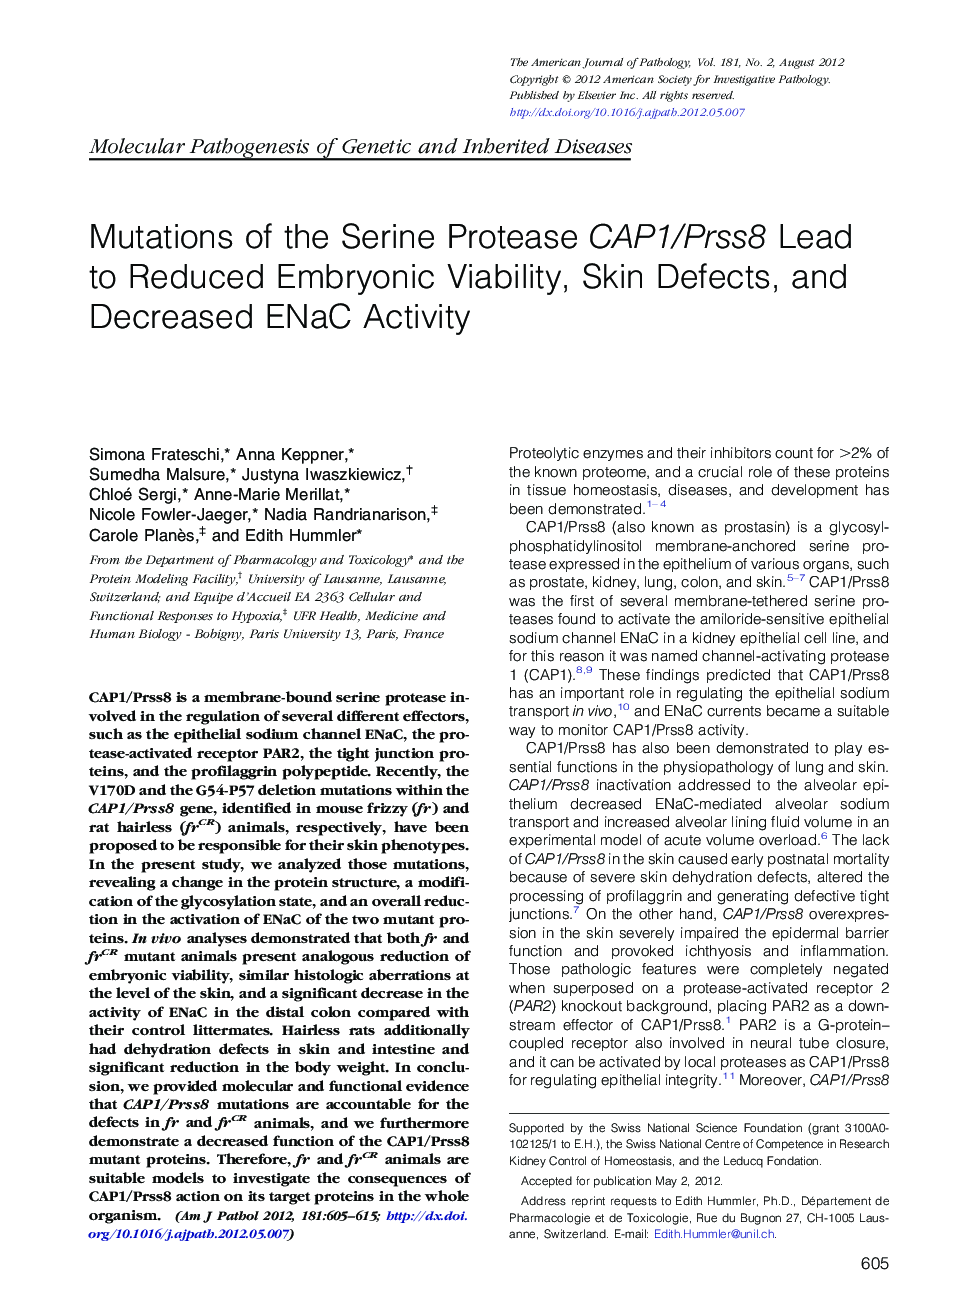 Mutations of the Serine Protease CAP1/Prss8 Lead to Reduced Embryonic Viability, Skin Defects, and Decreased ENaC Activity